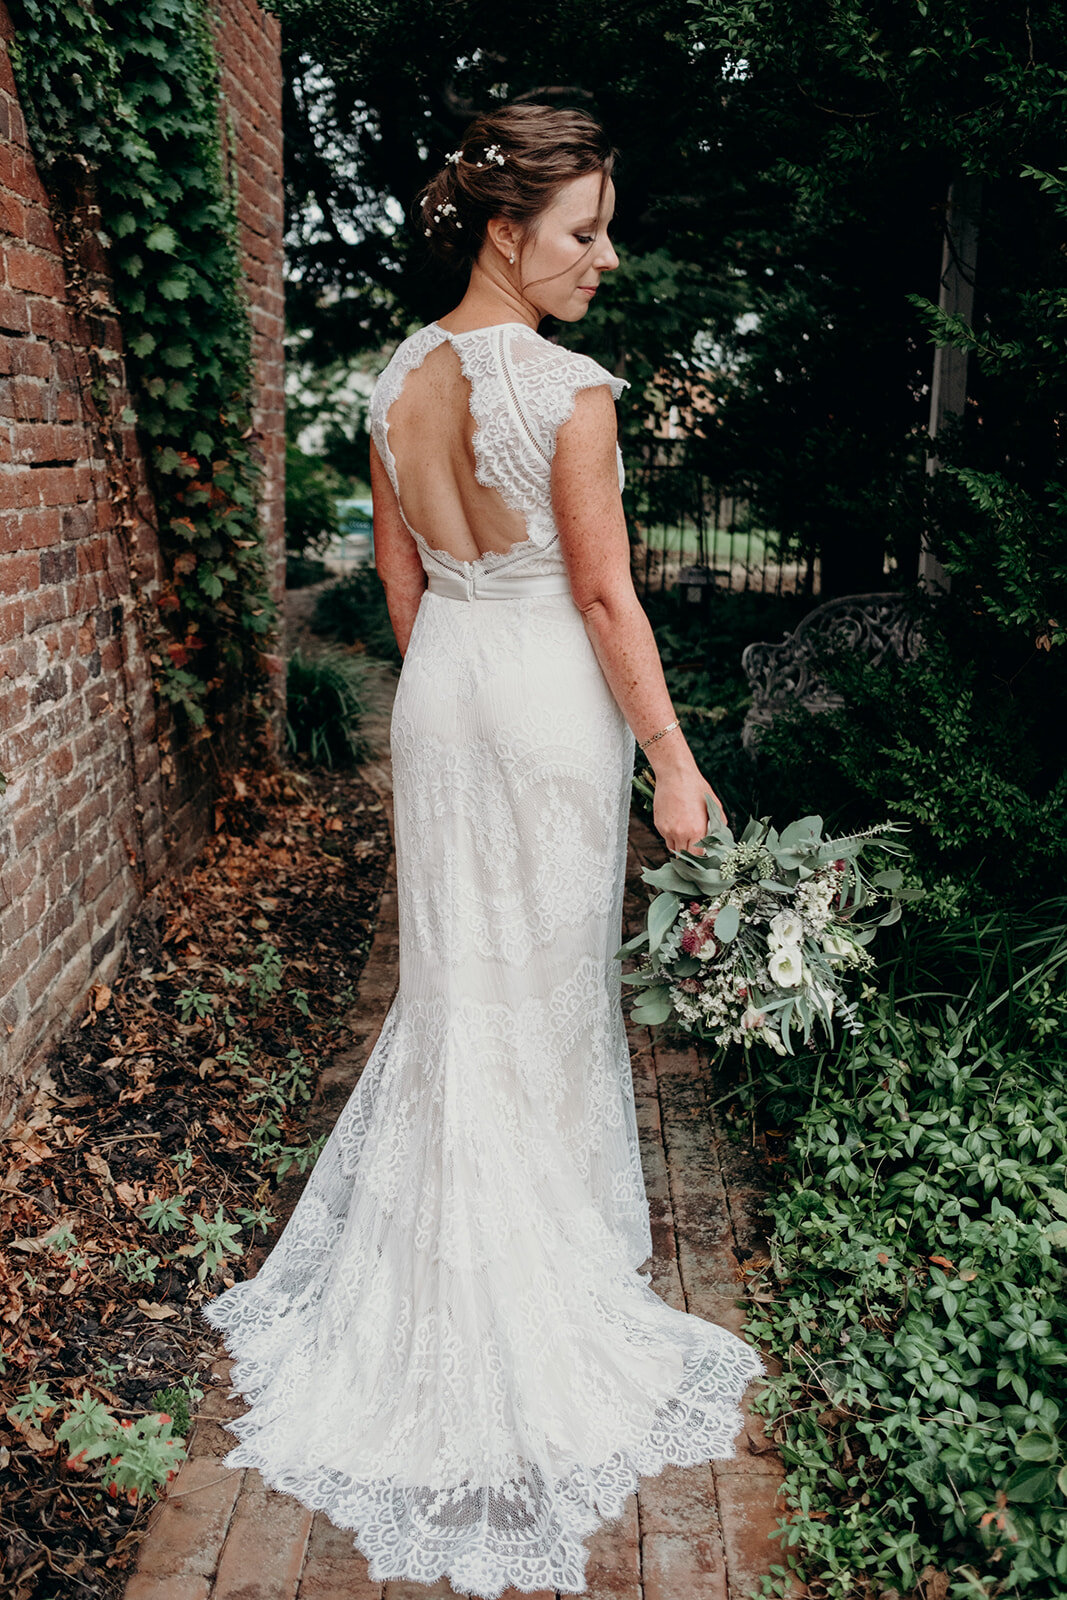 A bride with a sleeveless, open back lace wedding dress looks down at her bouquet.